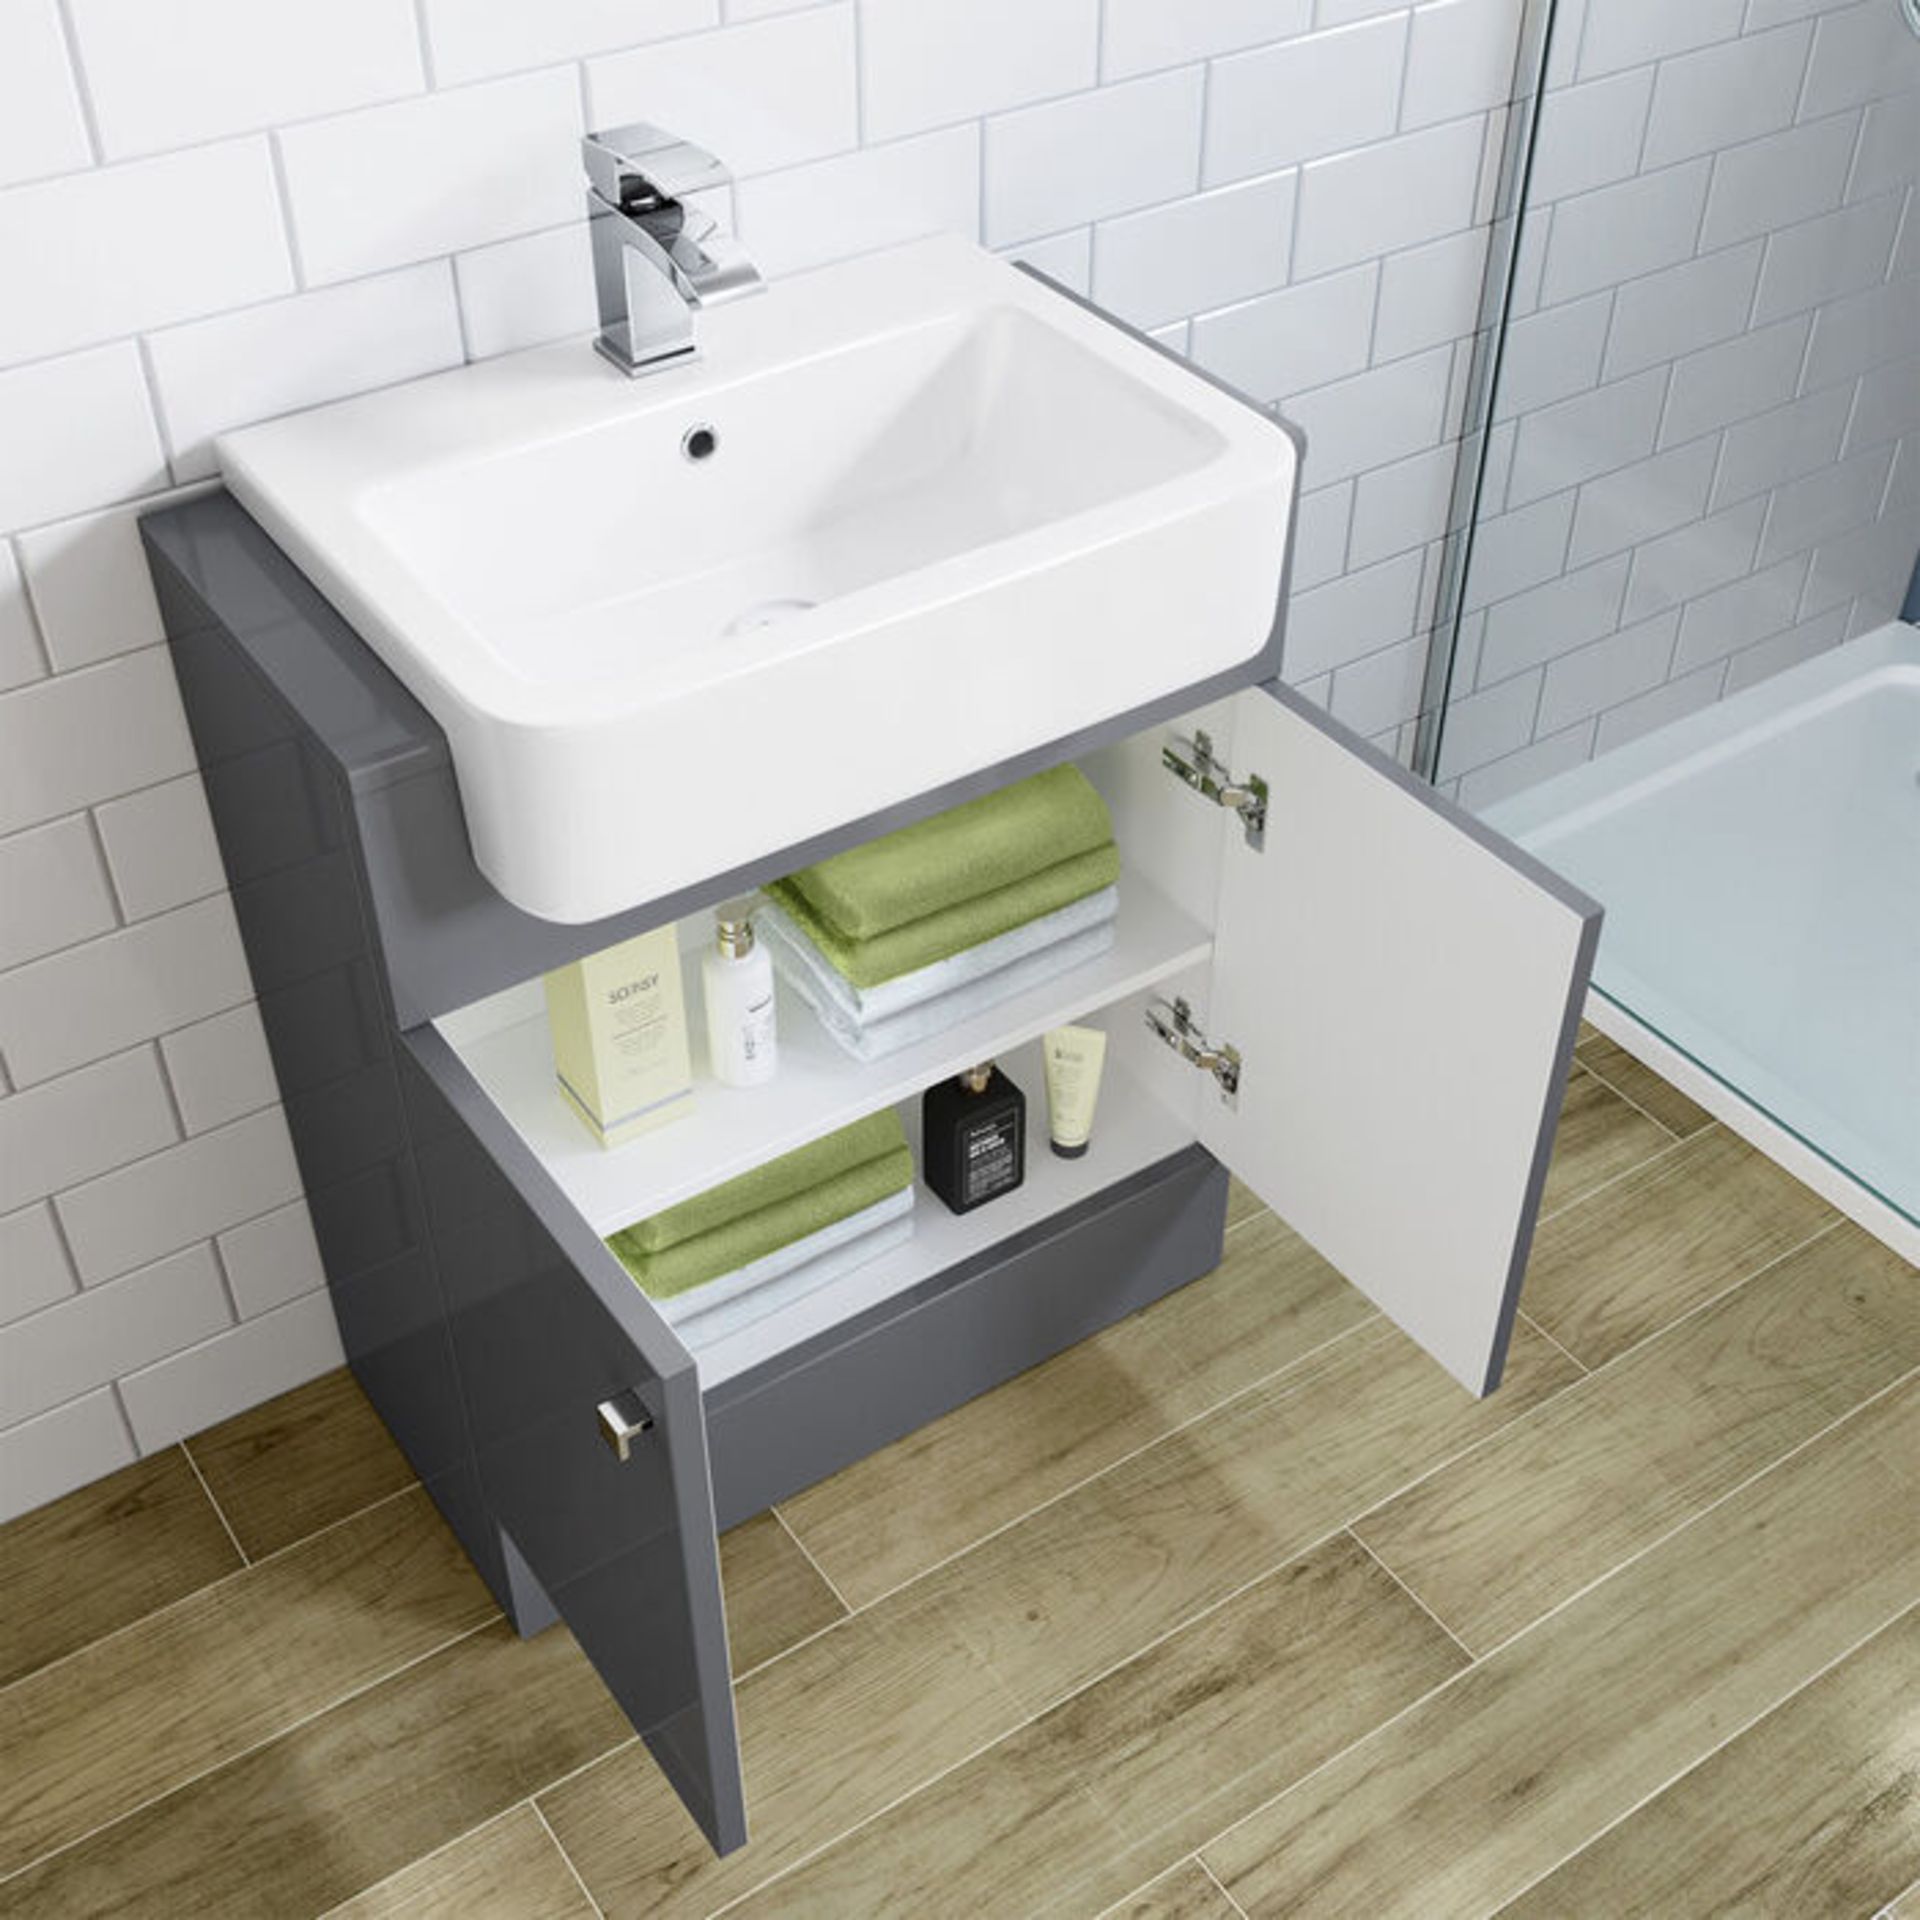 (H73) 660mm Harper Gloss Grey Sink Vanity Unit - Floor Standing. Basin not included. Expertly ... - Image 2 of 2